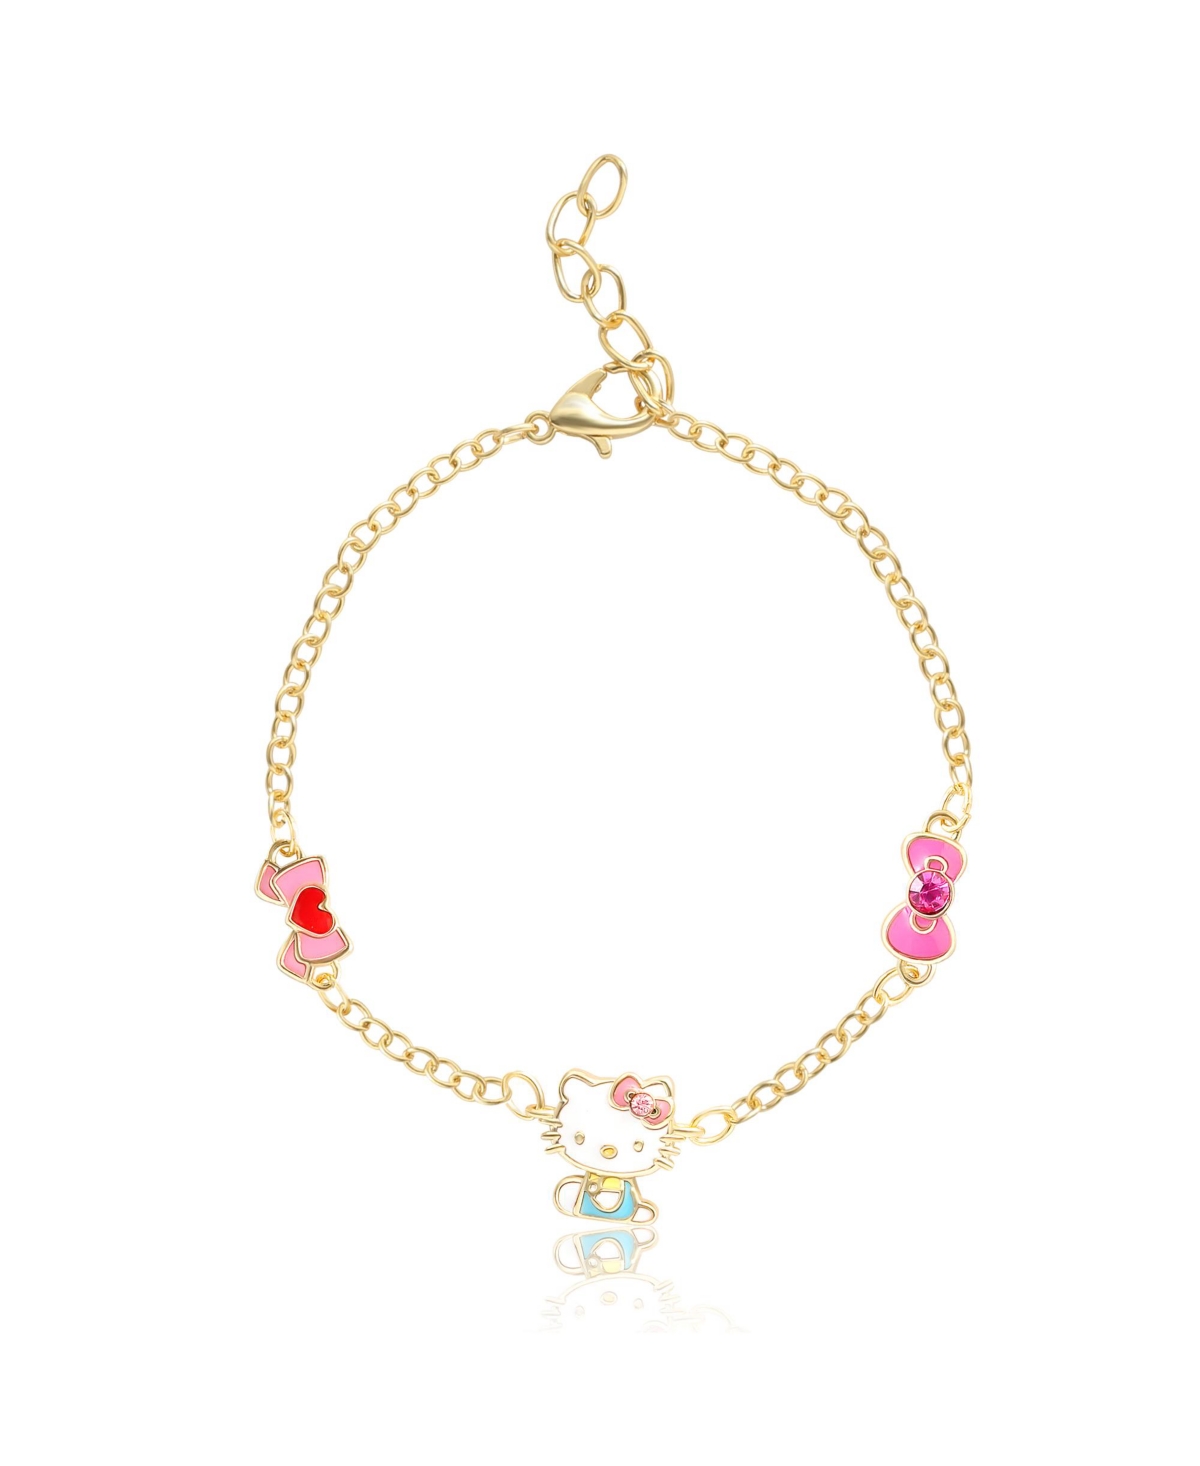 Sanrio Hello Kitty and Friends Womens 18kt Gold Plated Bracelet with Bow Charm Pendants - 6.5 + 1", Officially Licensed - Gold tone, pink